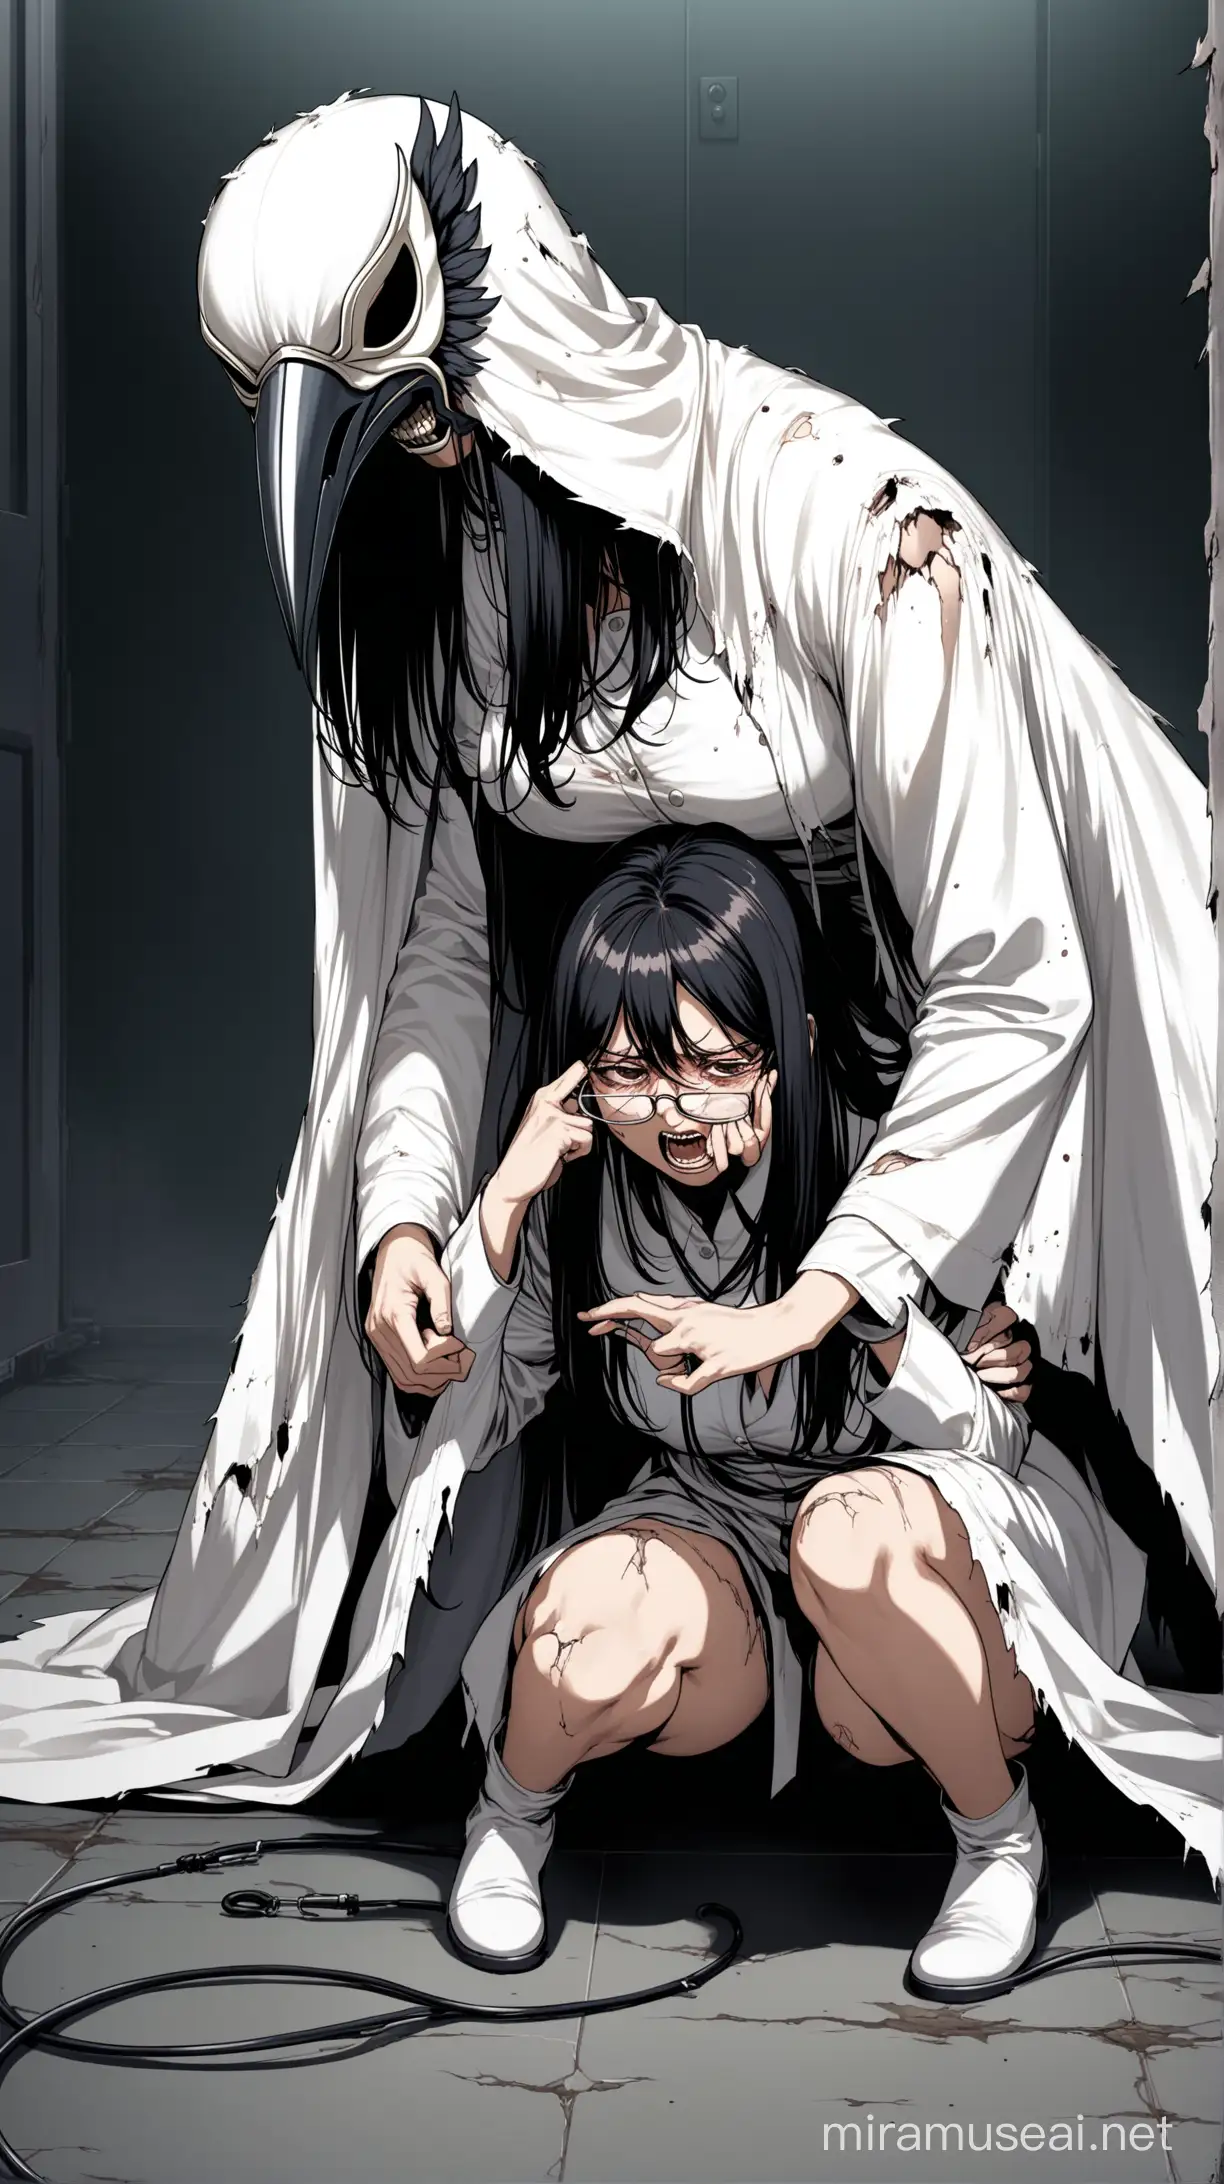 A female plauge doctor with white leather crow mask. She has an all white leather cloak that covers her head. She crouches over a terrified man with black hair and glasses.  His clothes torn and tattered. 